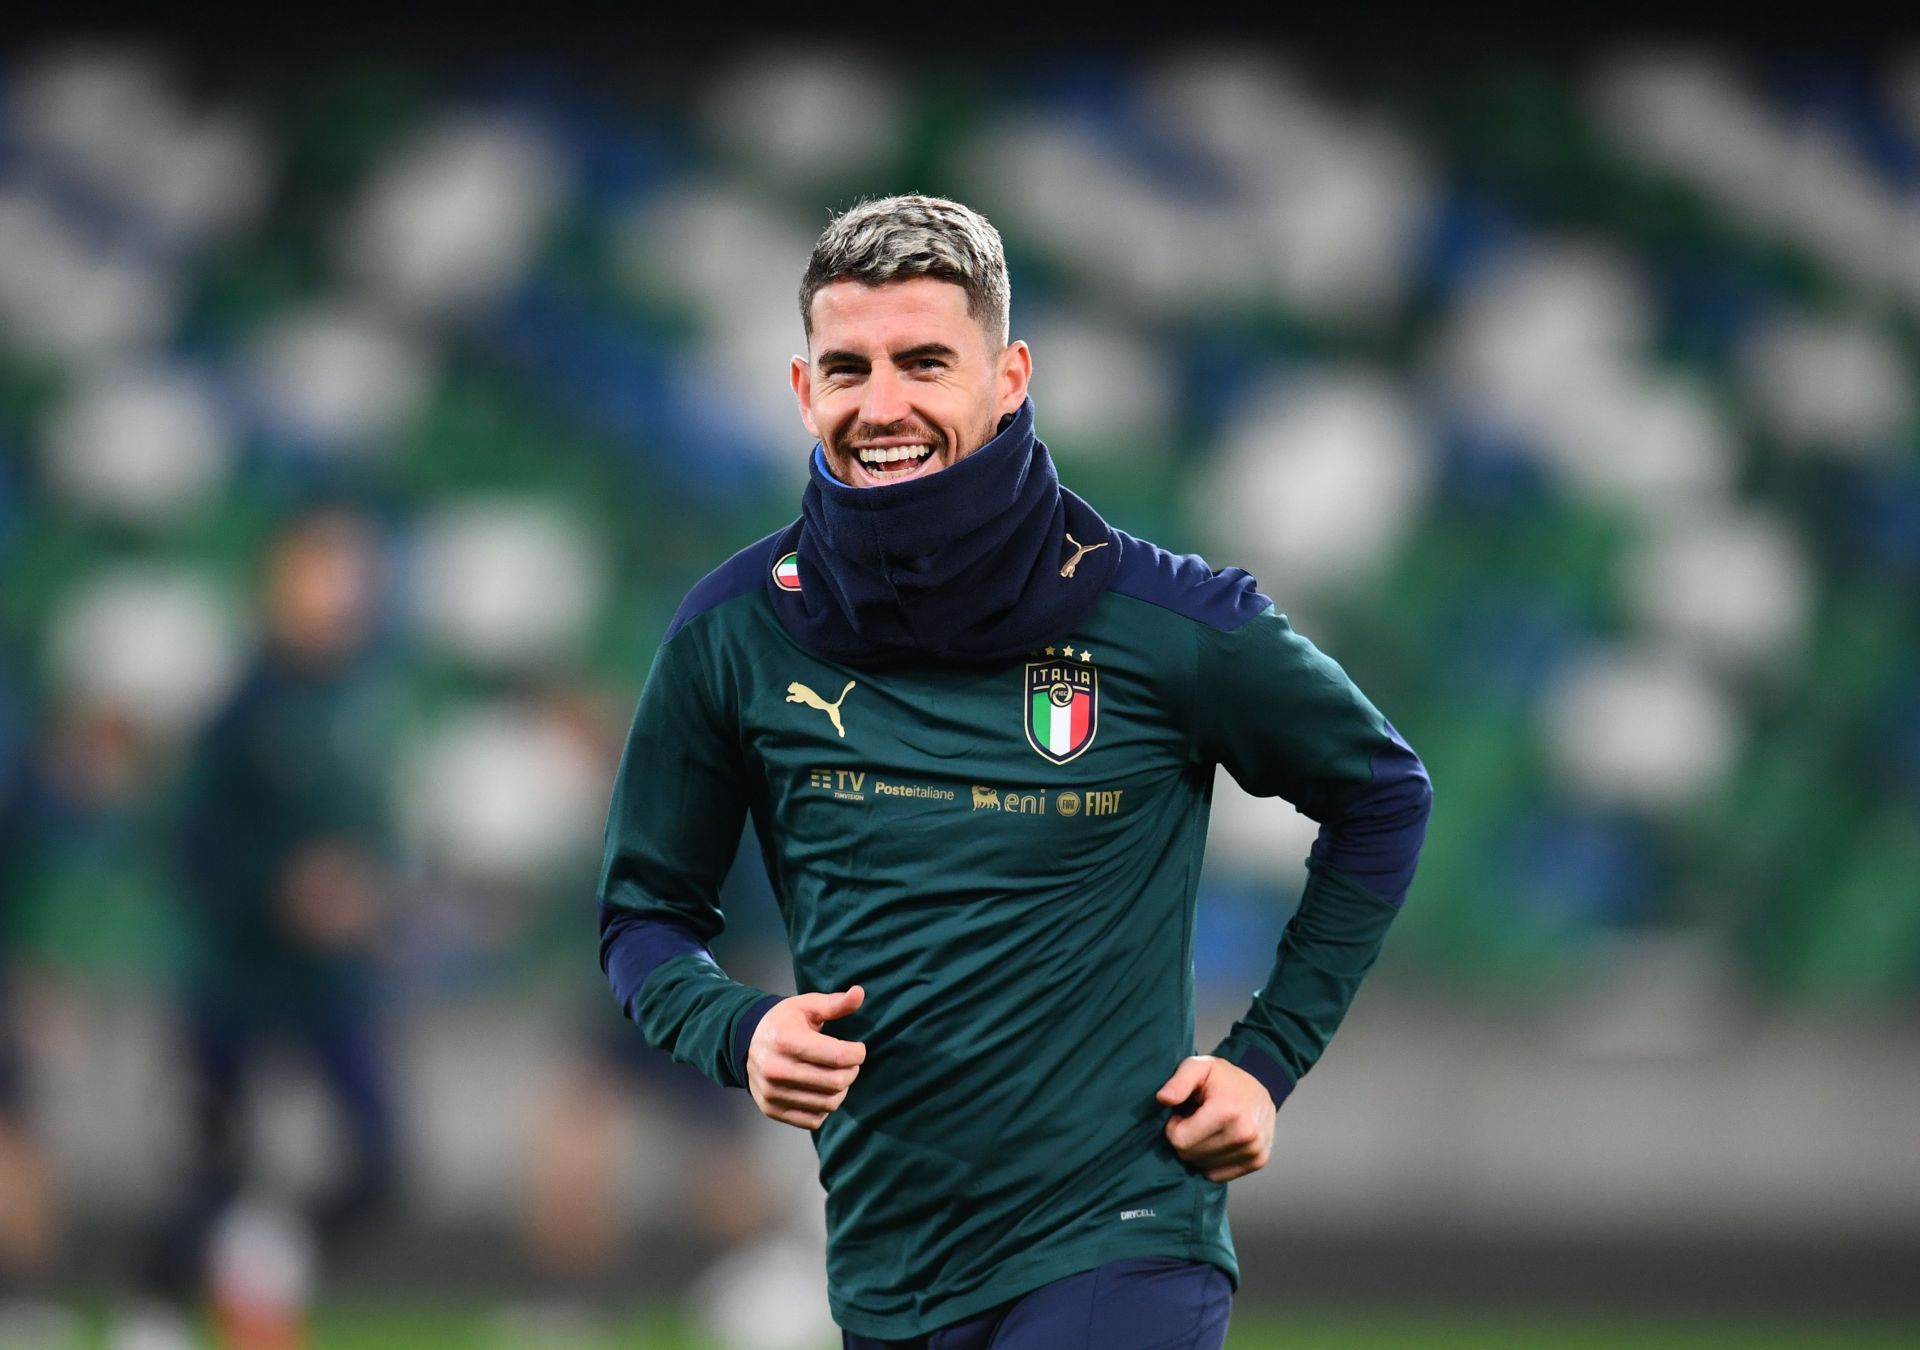 Jorginho with a smile on his face during an Italy training session.